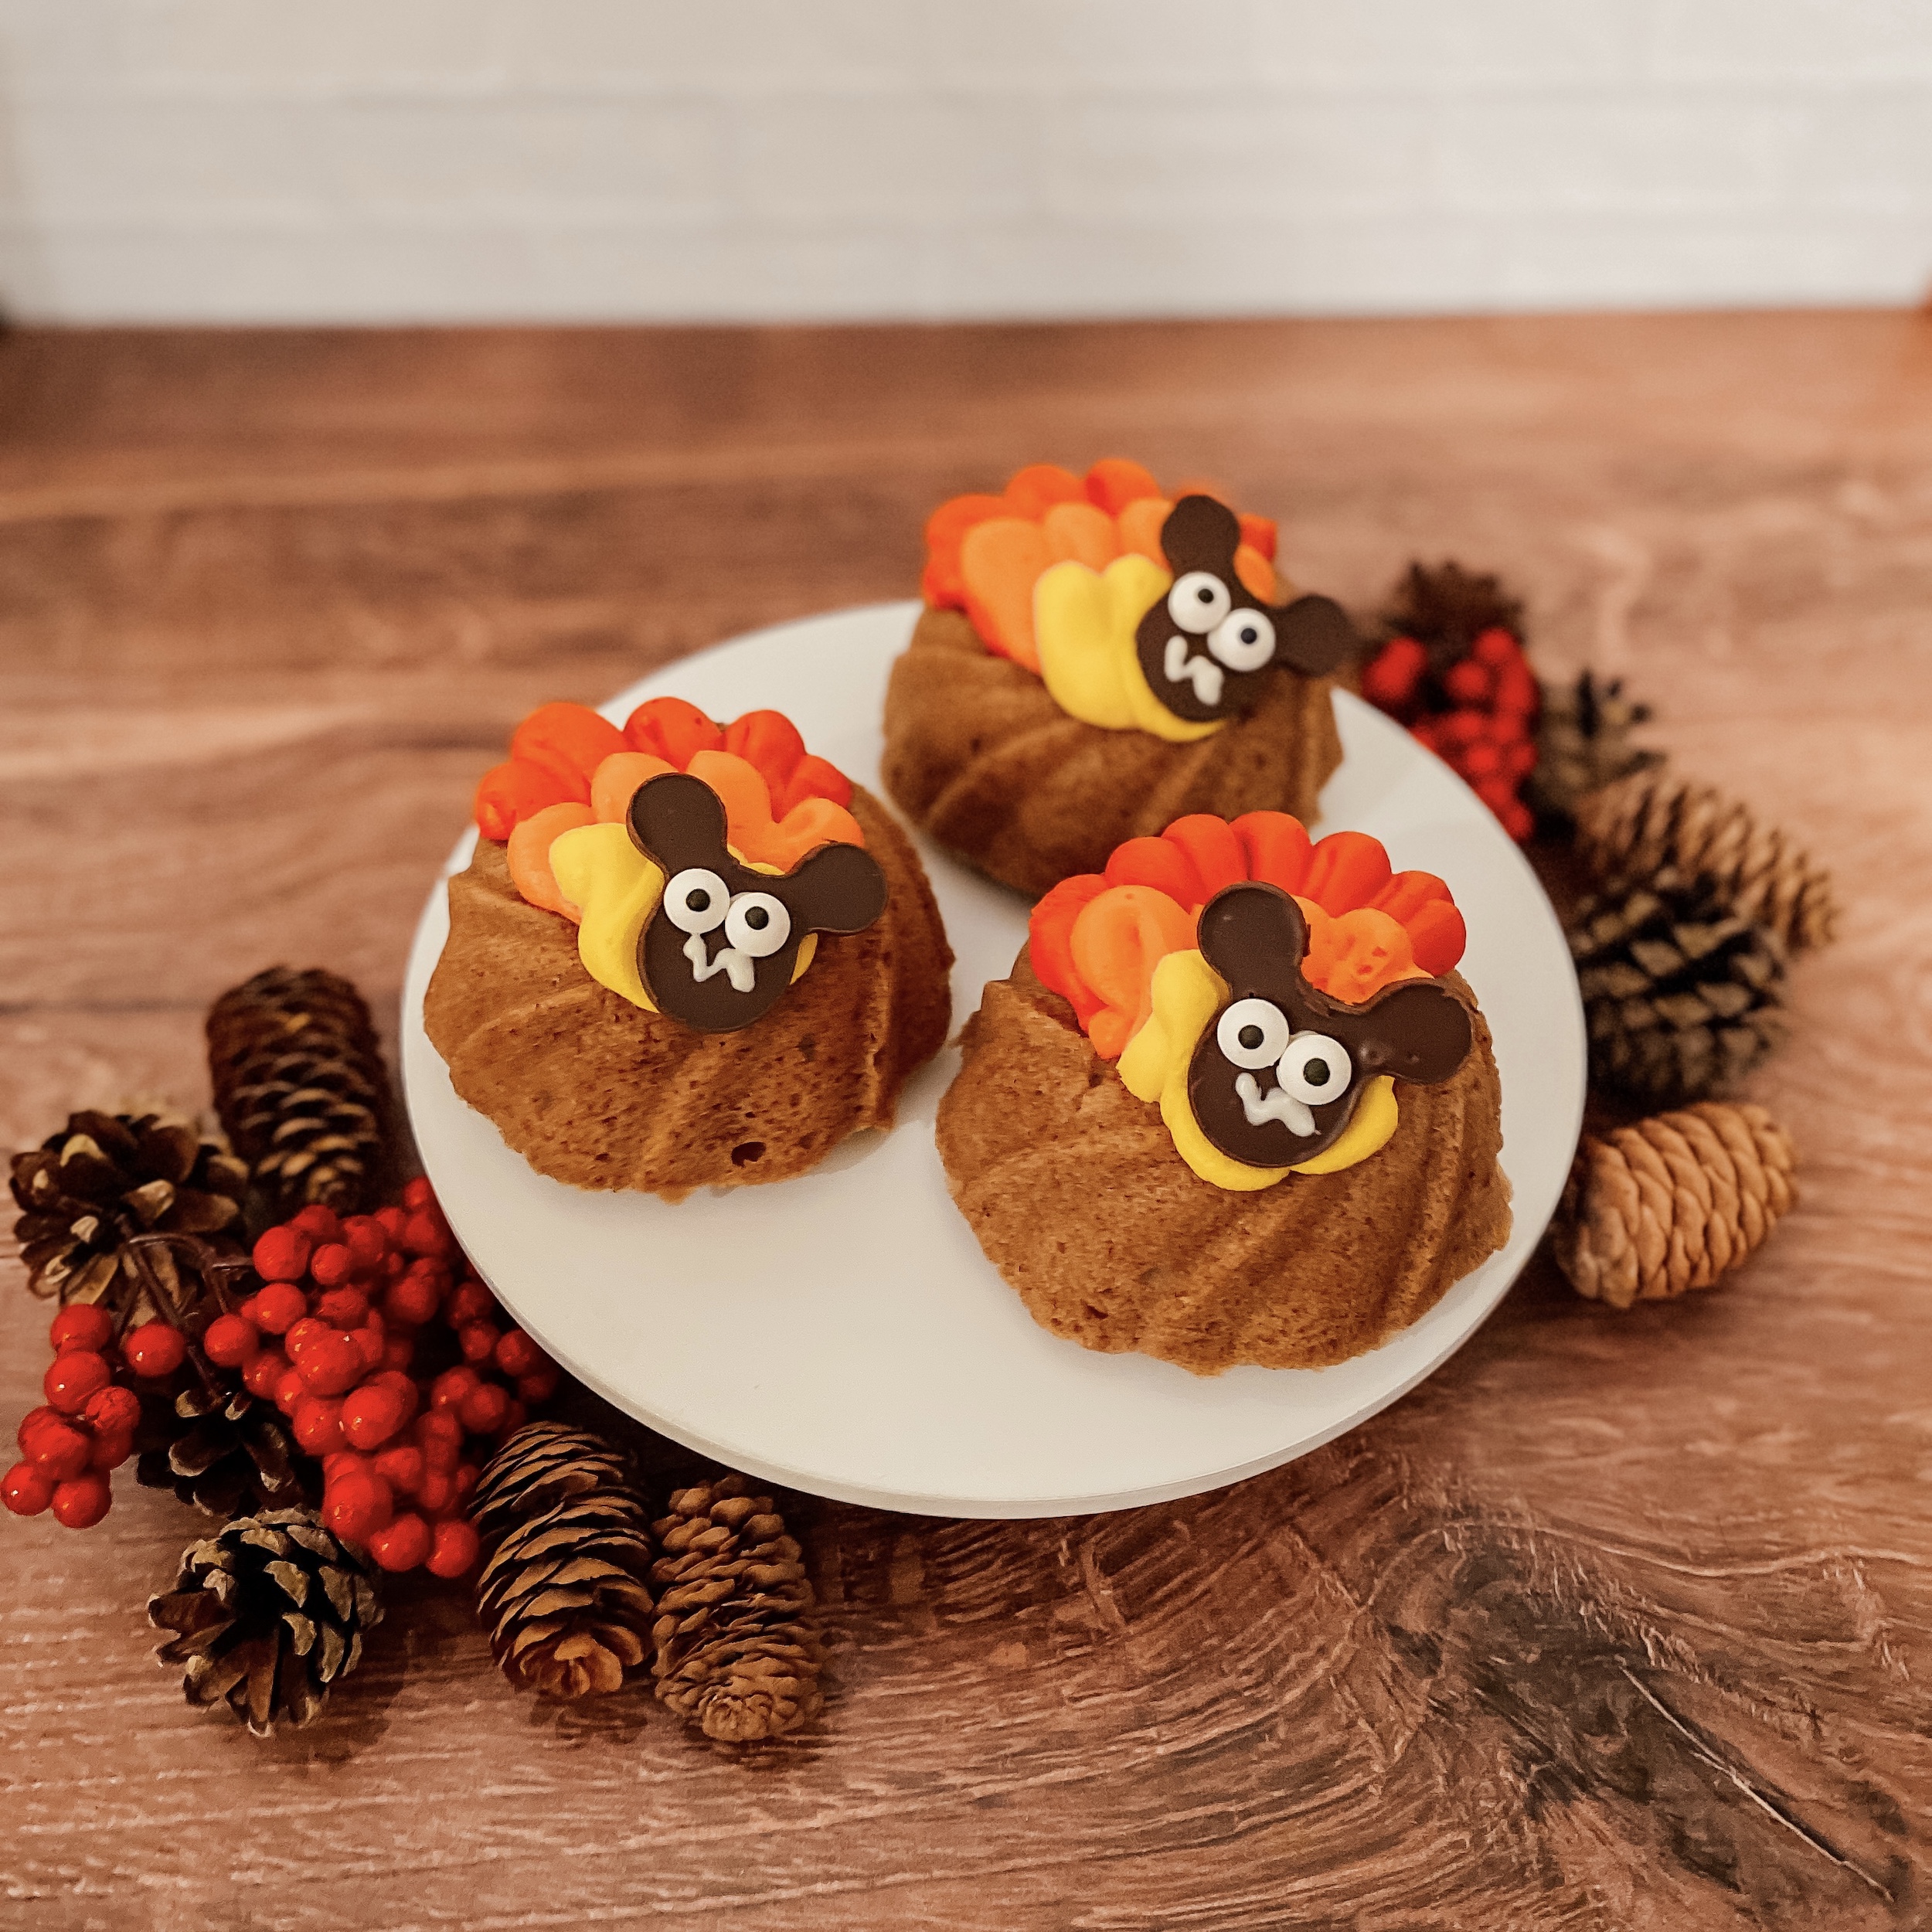 Mouseketeer Turkey Cakes (three cinnamon spice bundt cakes with red, orange, and yellow frosting, and a chocolate head with mickey ears on a plate)